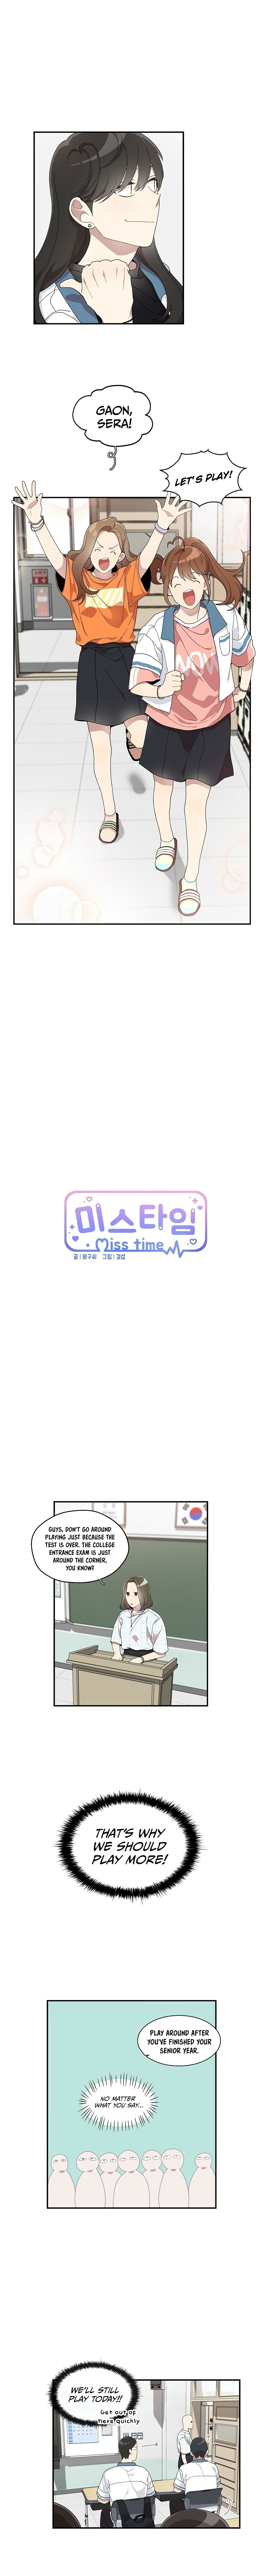 Miss Time chapter 21